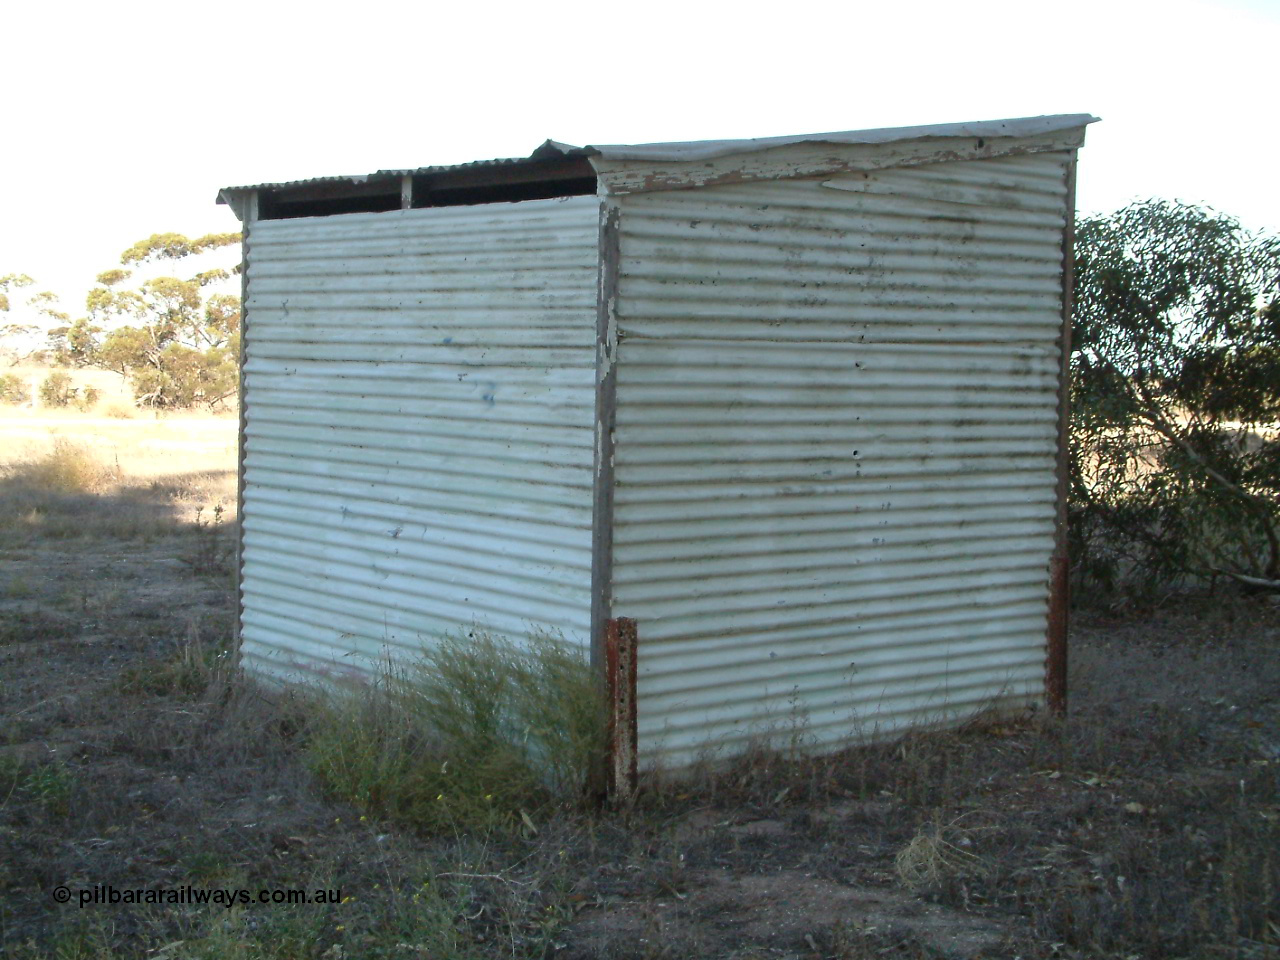 030405 154839
Lock, rear view of corrugated iron building located across the tracks opposite the silos, 5th April 2003.
